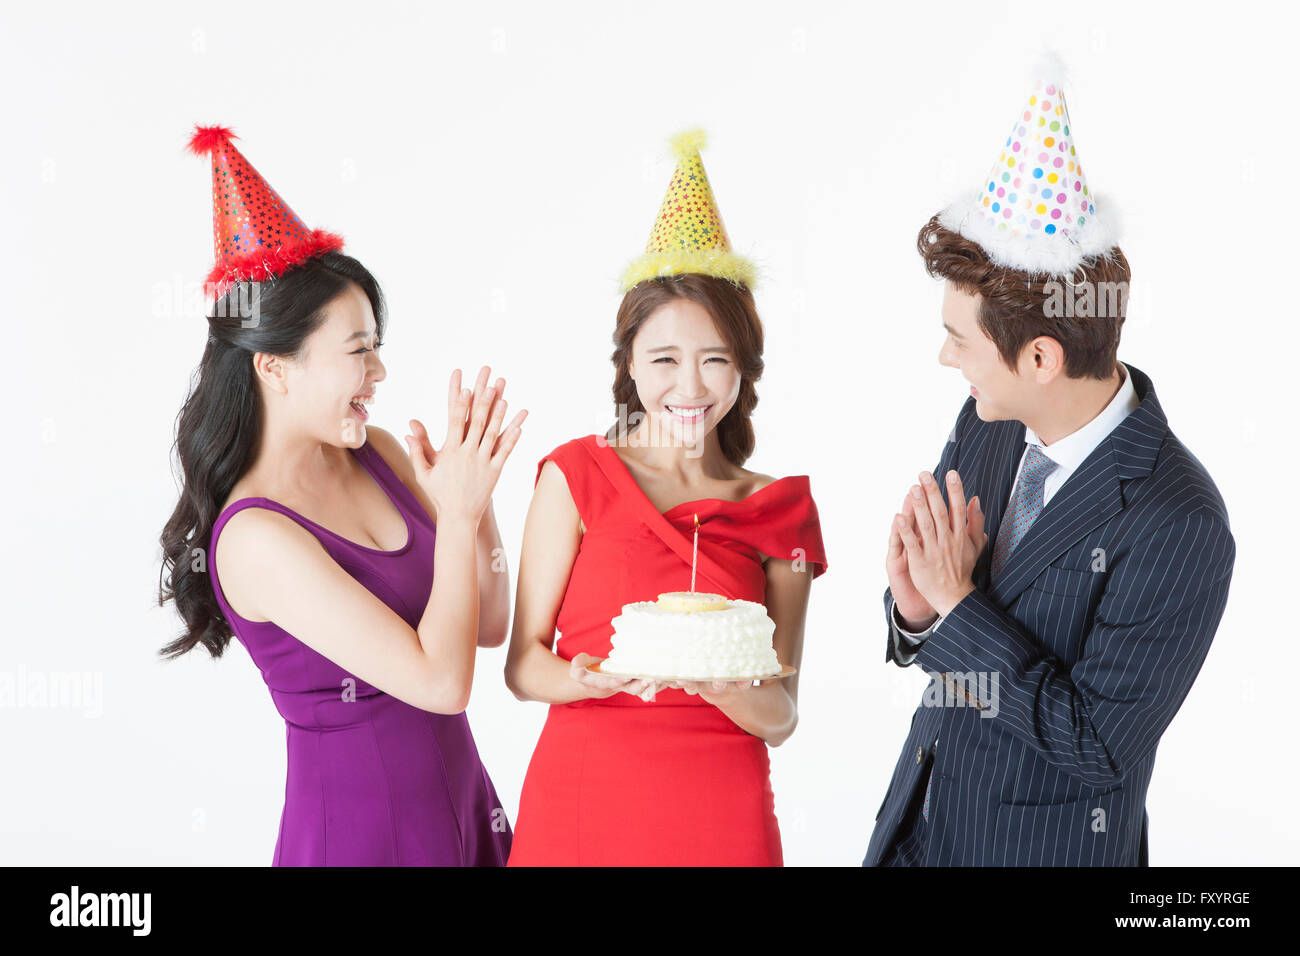 Portrait of young smiling woman with a cake and her friends clapping hands Stock Photo